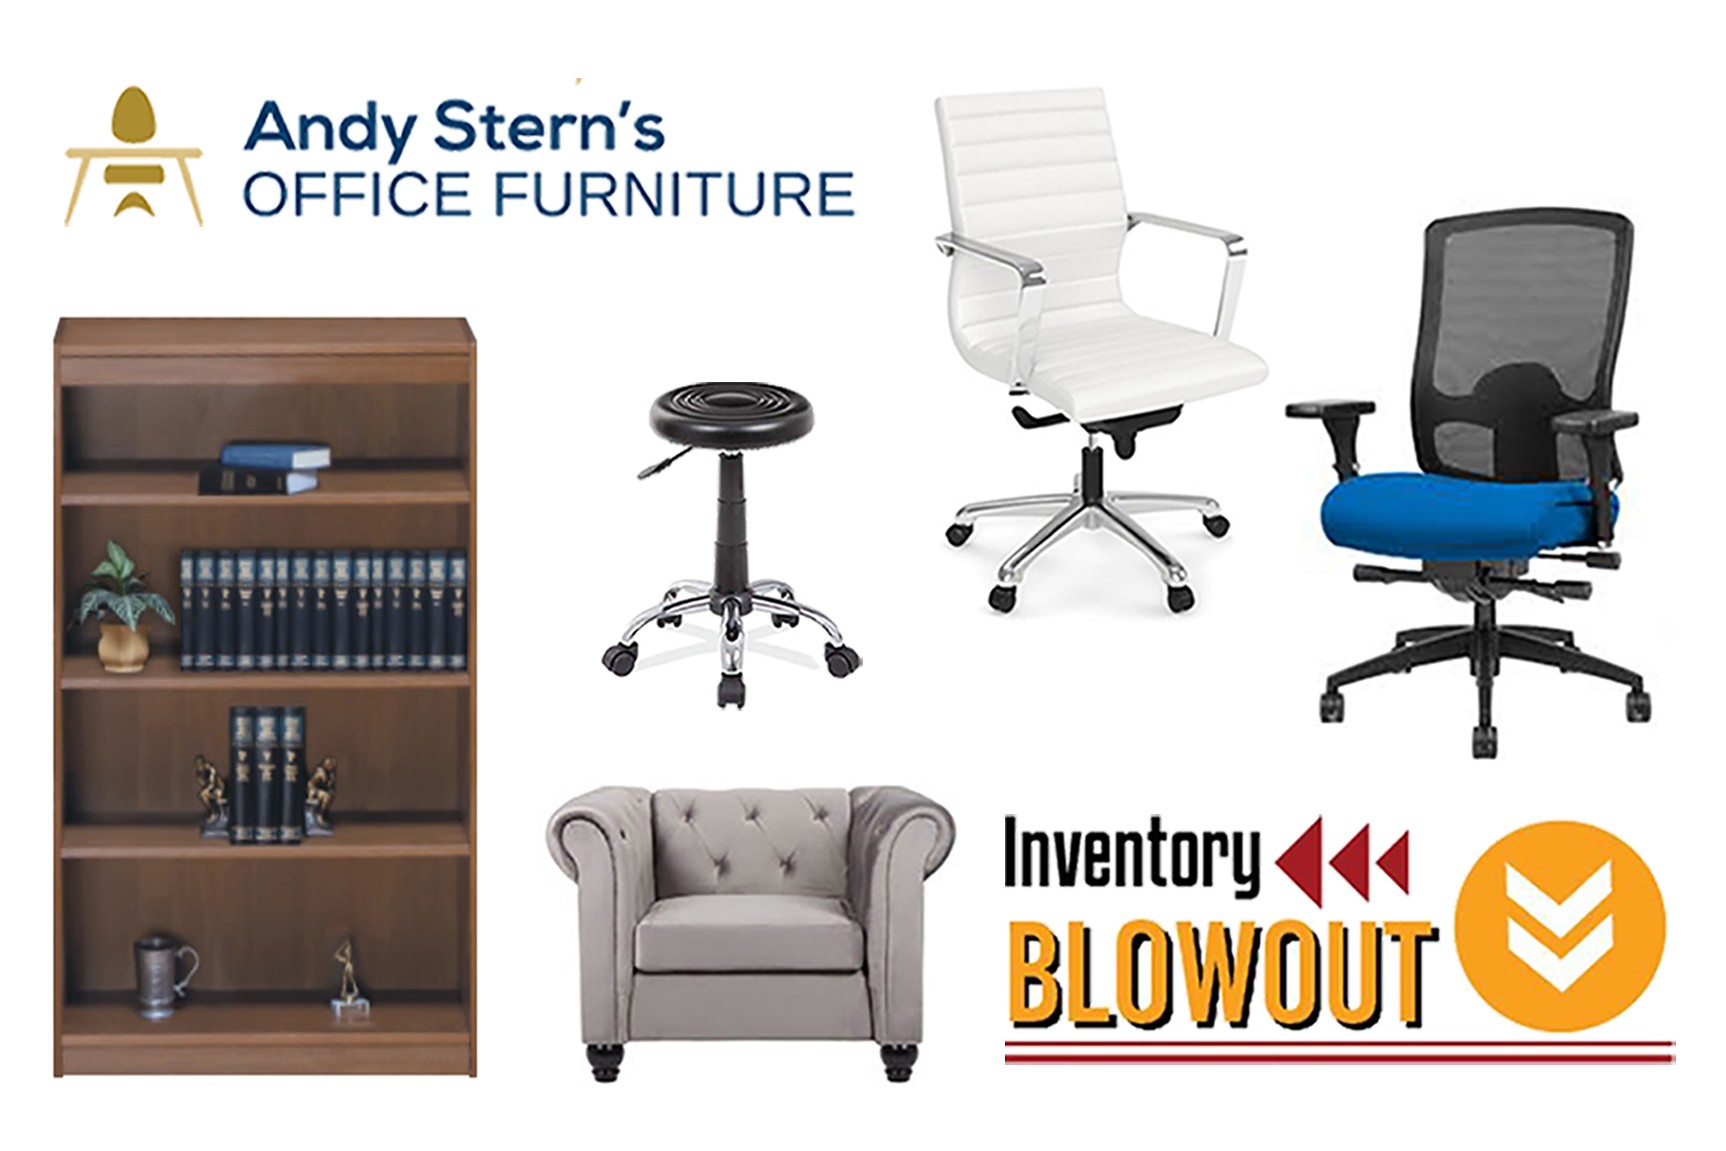 bookshelf and office chairs on sale